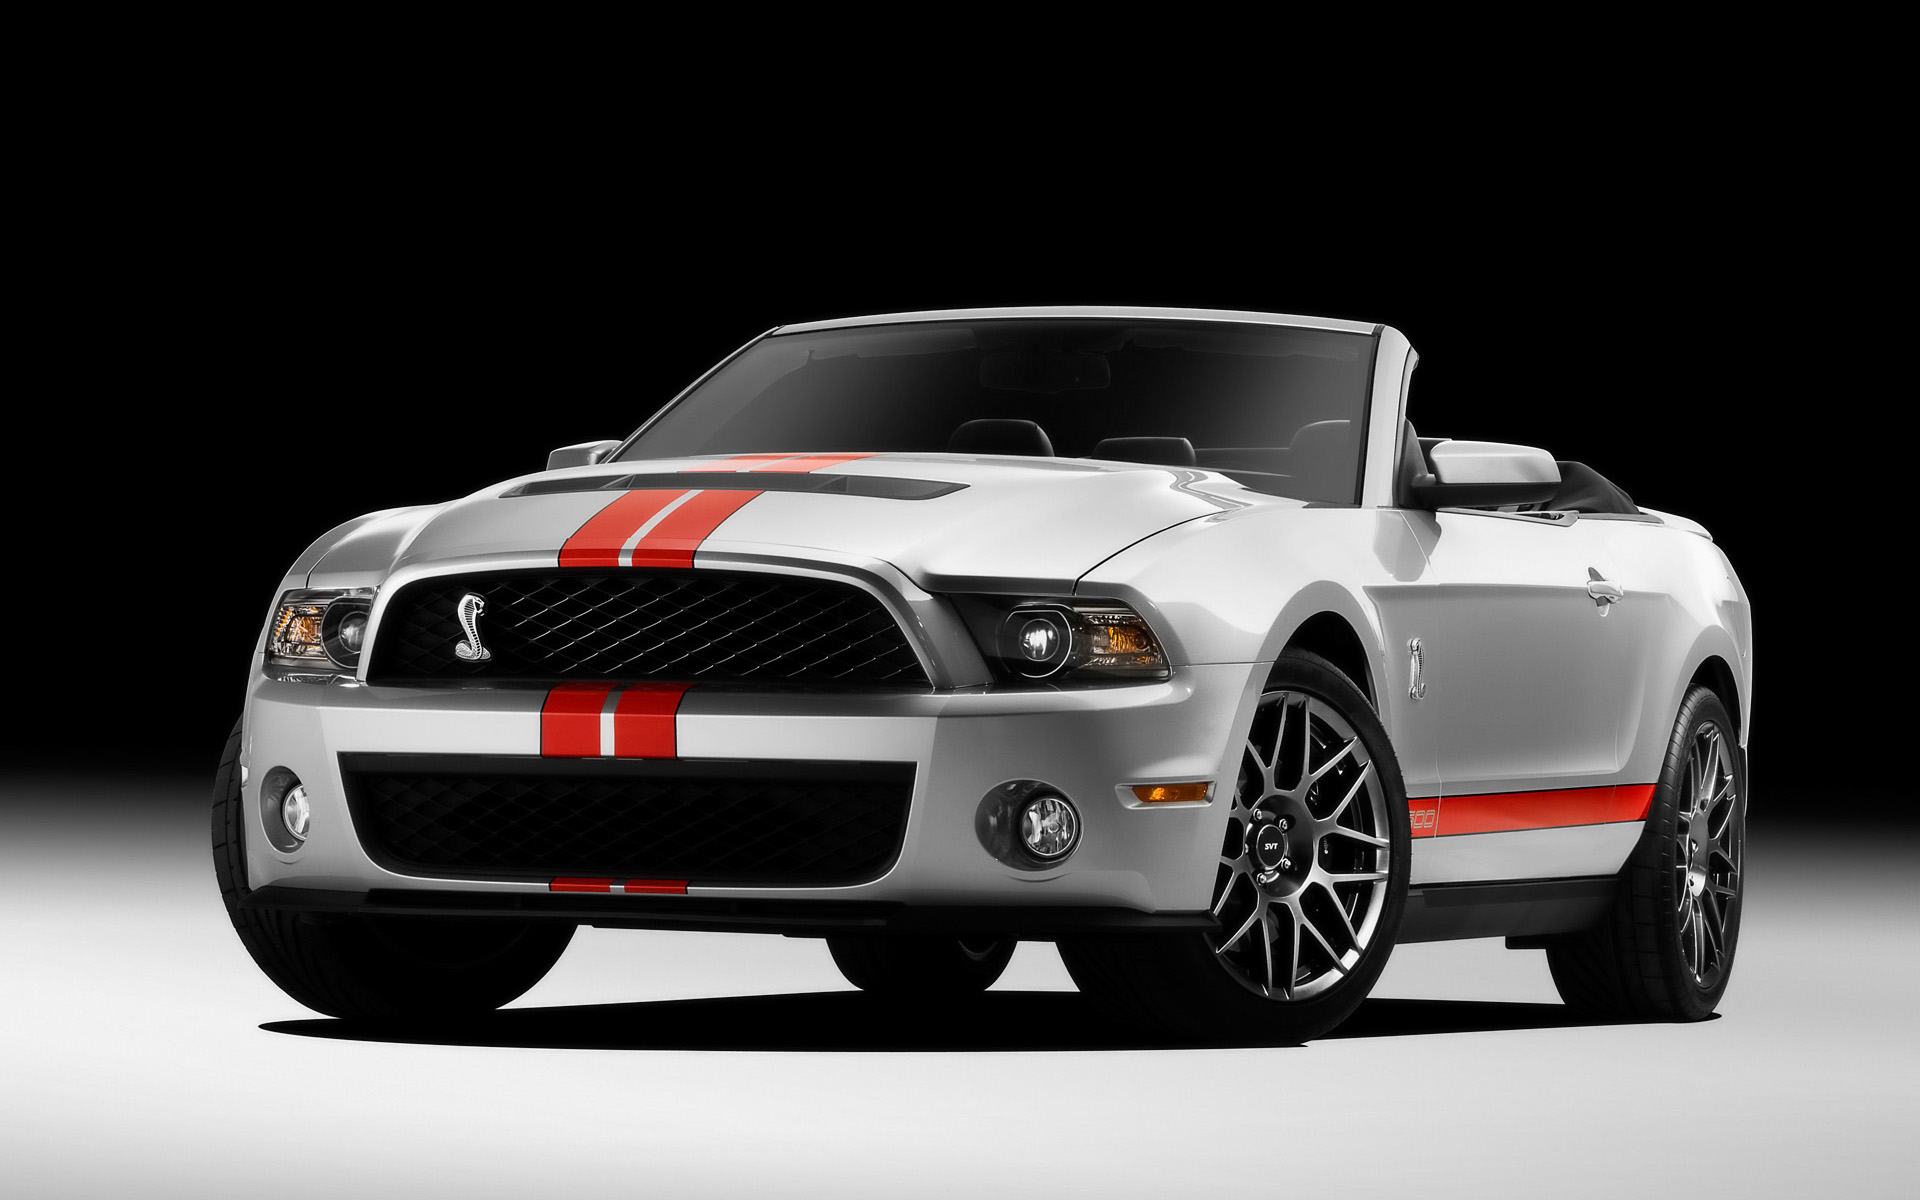  2010 Ford Shelby Mustang GT500 Wallpaper.